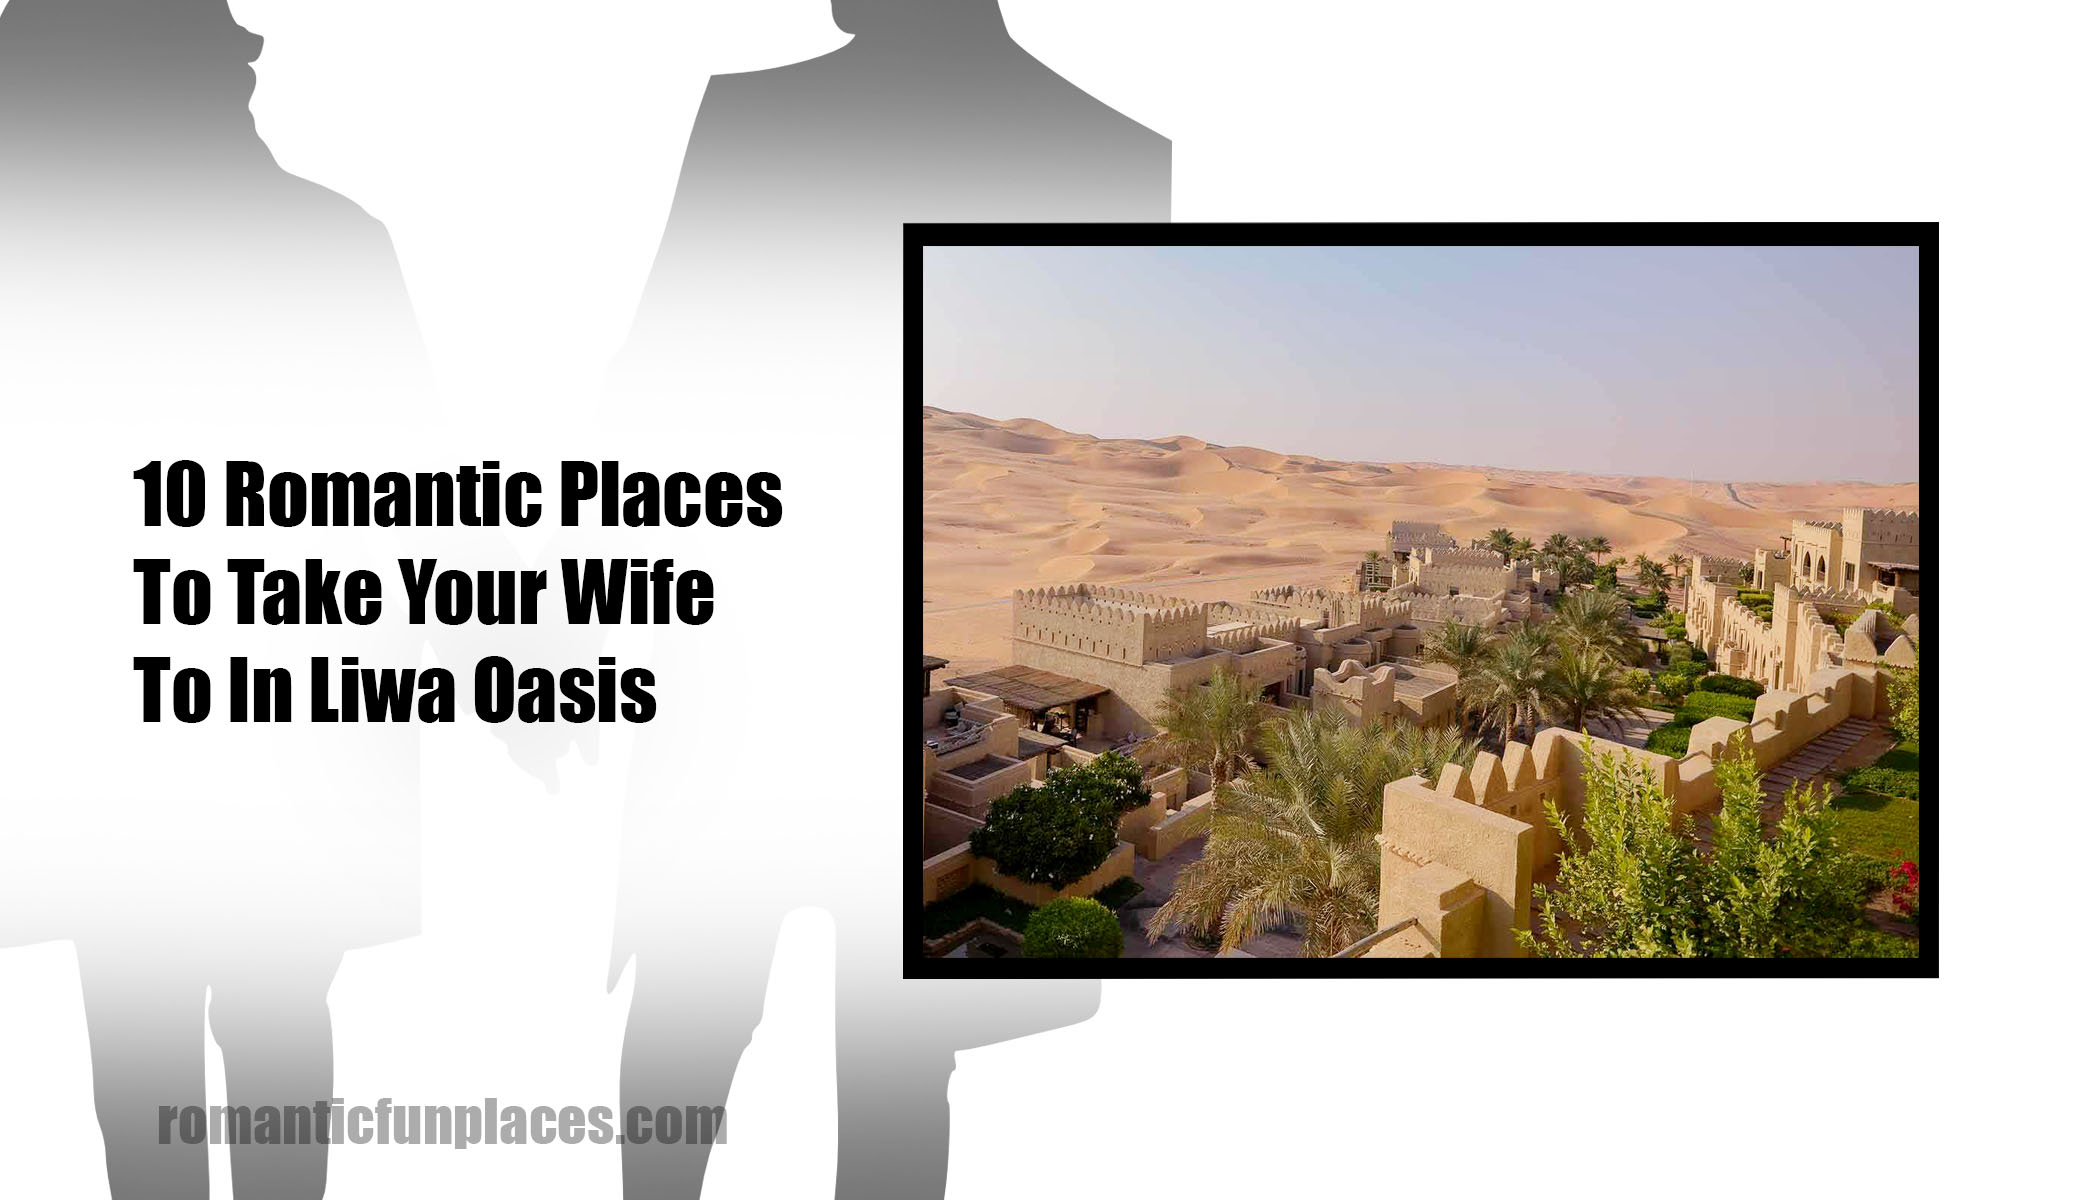 10 Romantic Places To Take Your Wife To In Liwa Oasis